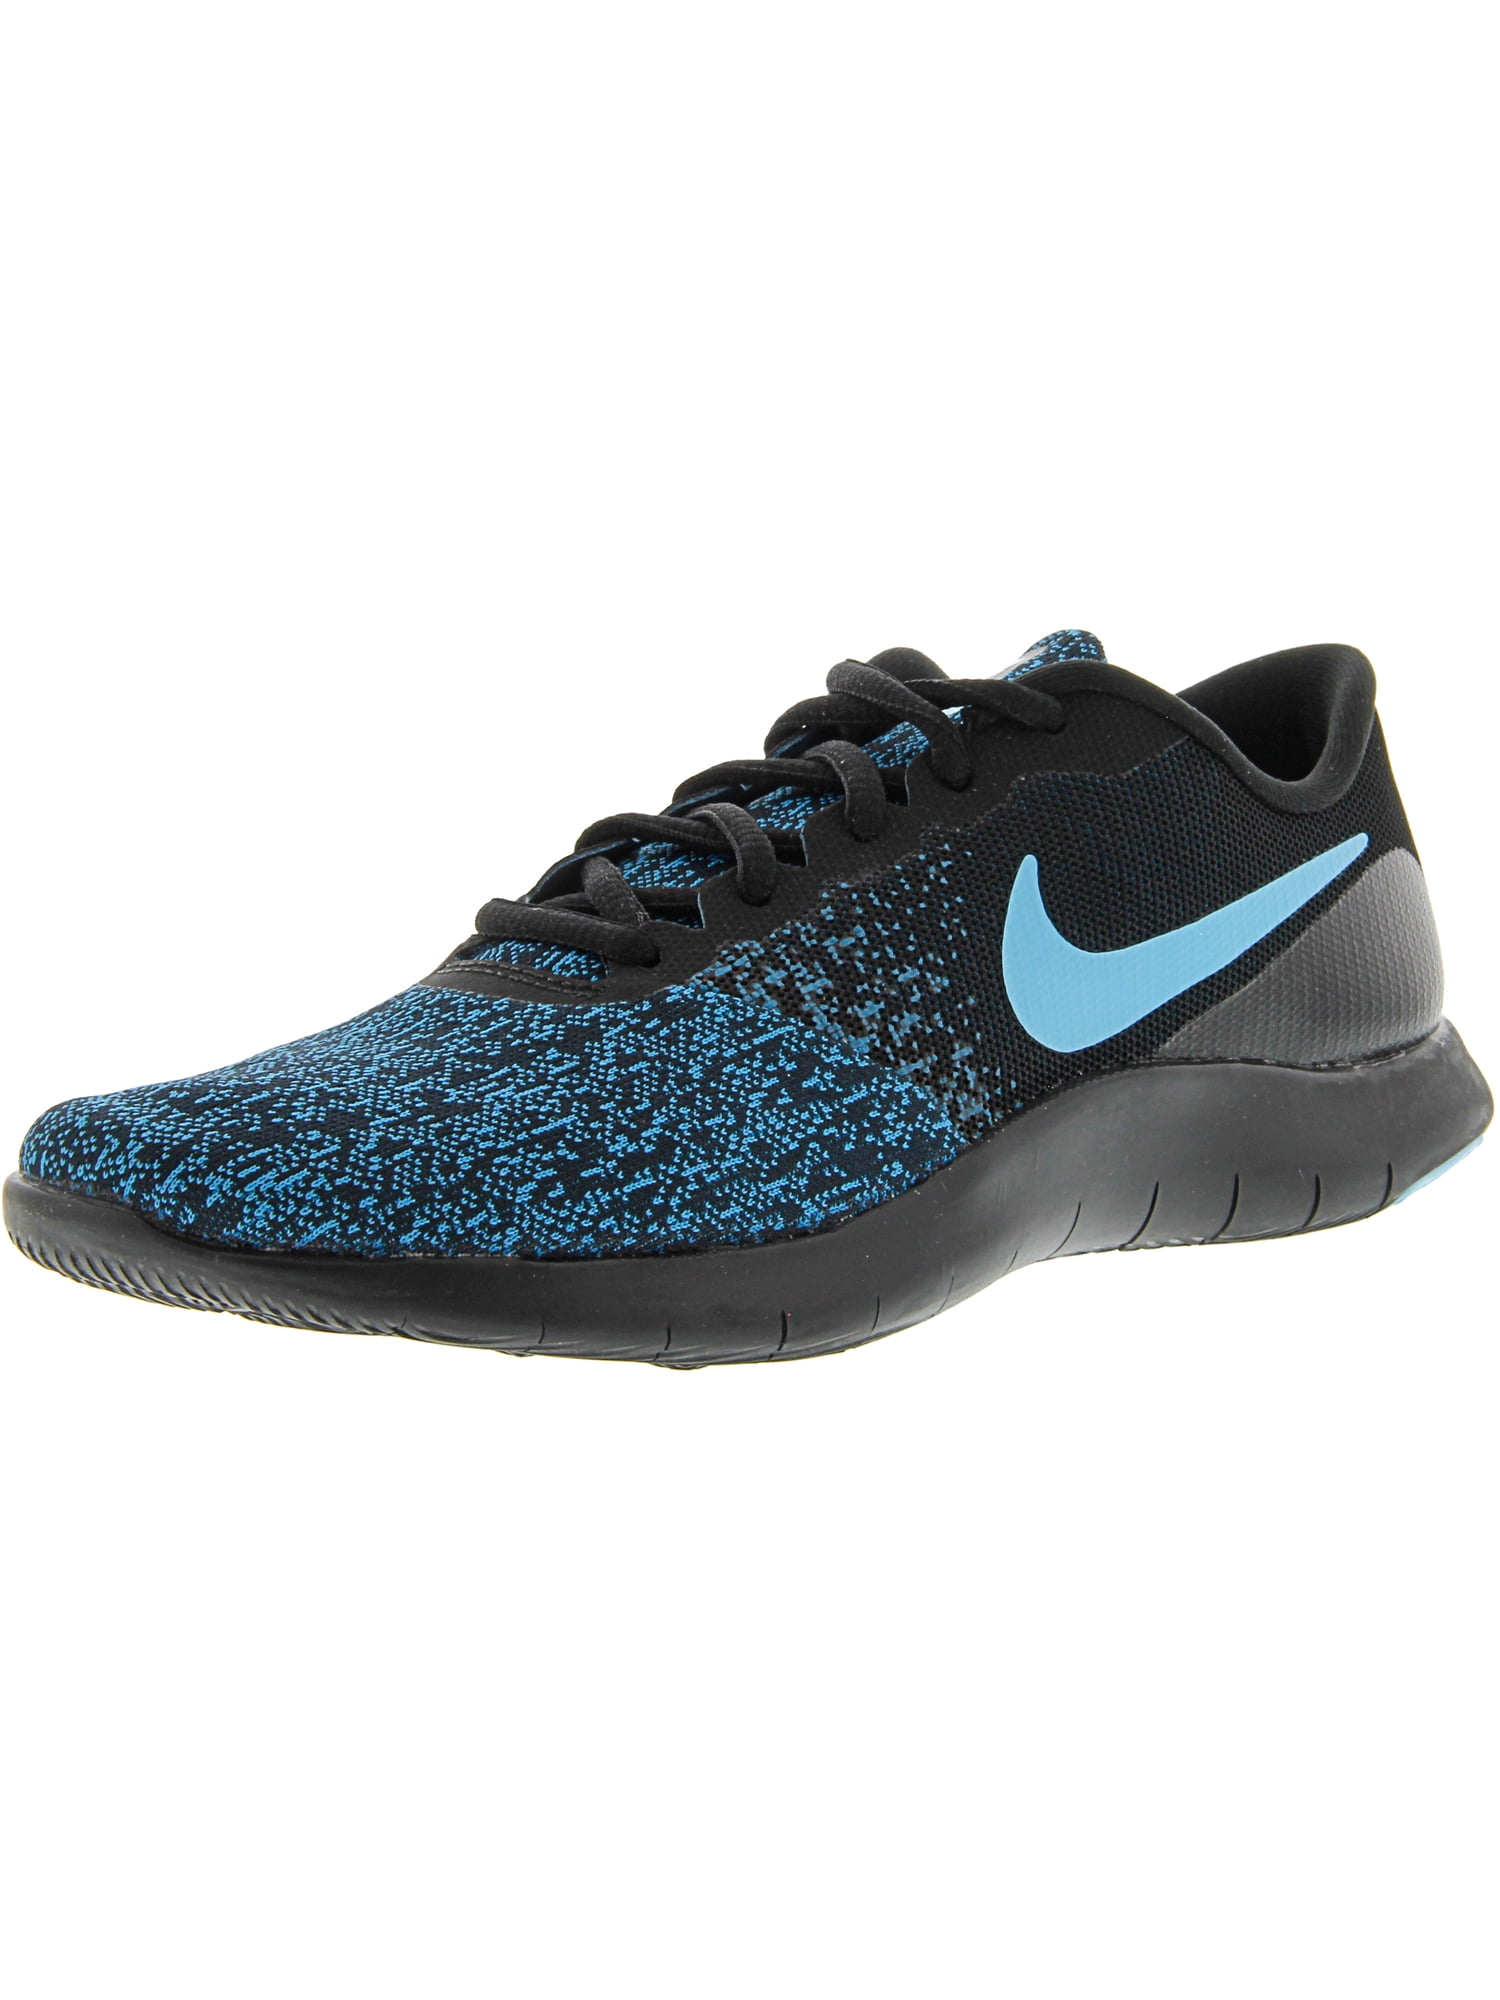 Nike Women's Flex Contact Black / Lagoon Pulse - Green Abyss Ankle-High ...